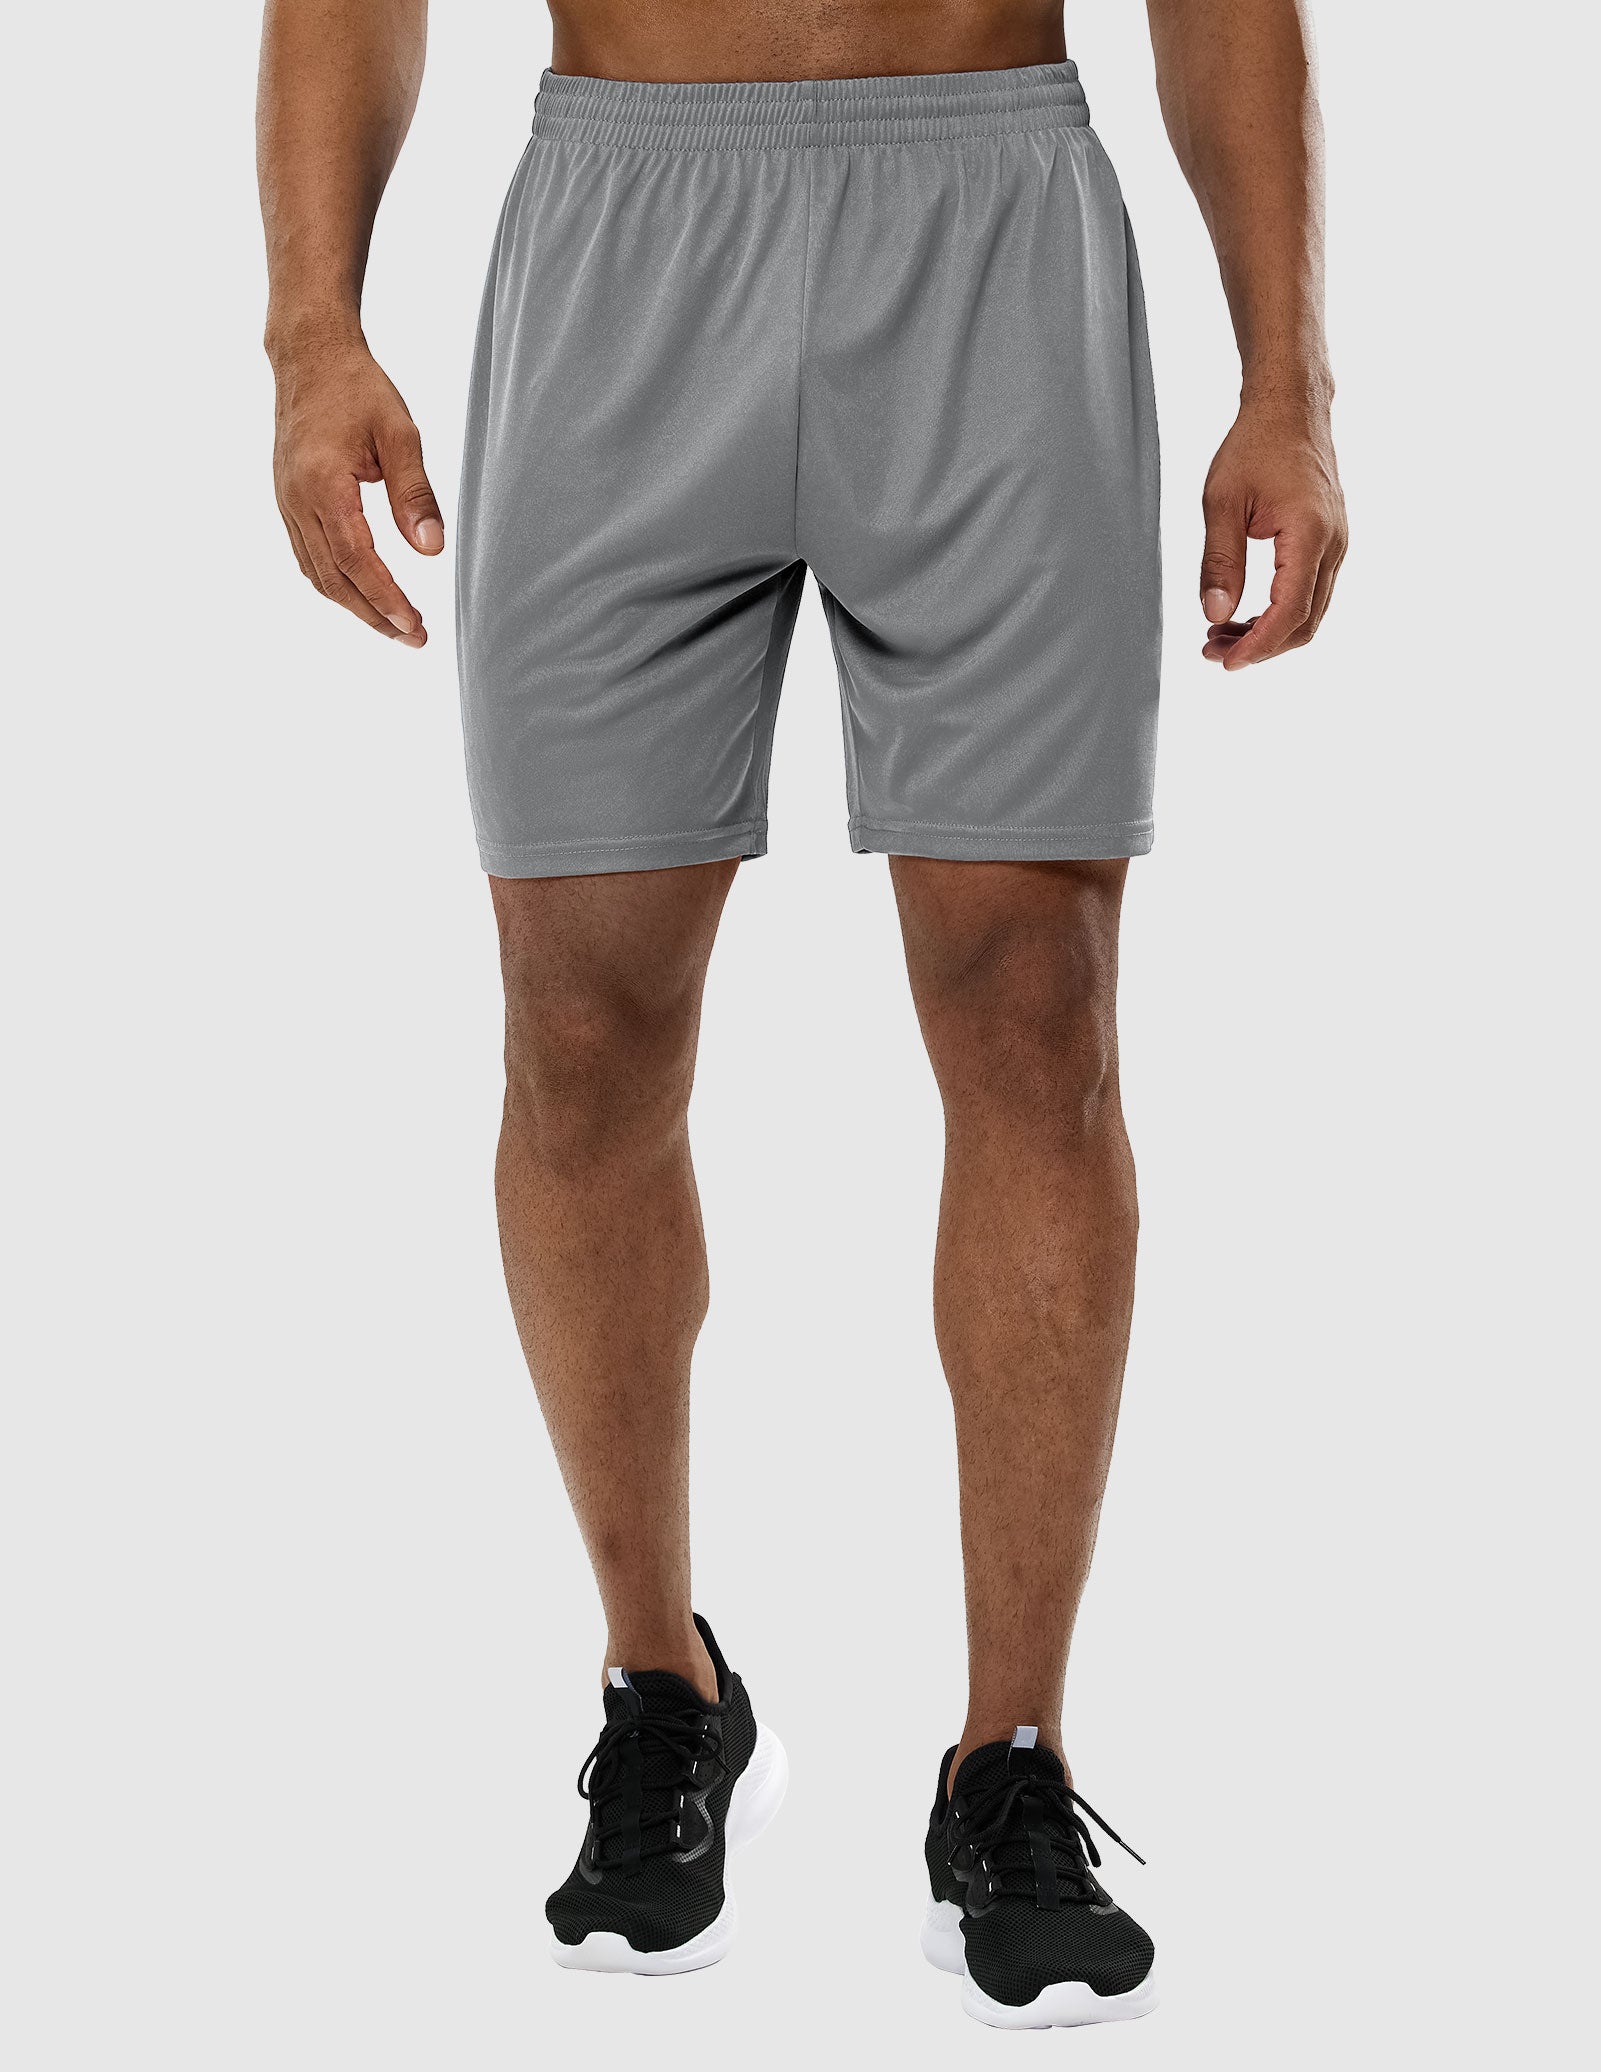 Men's Quick-Dry Athletic Running Shorts without Pockets